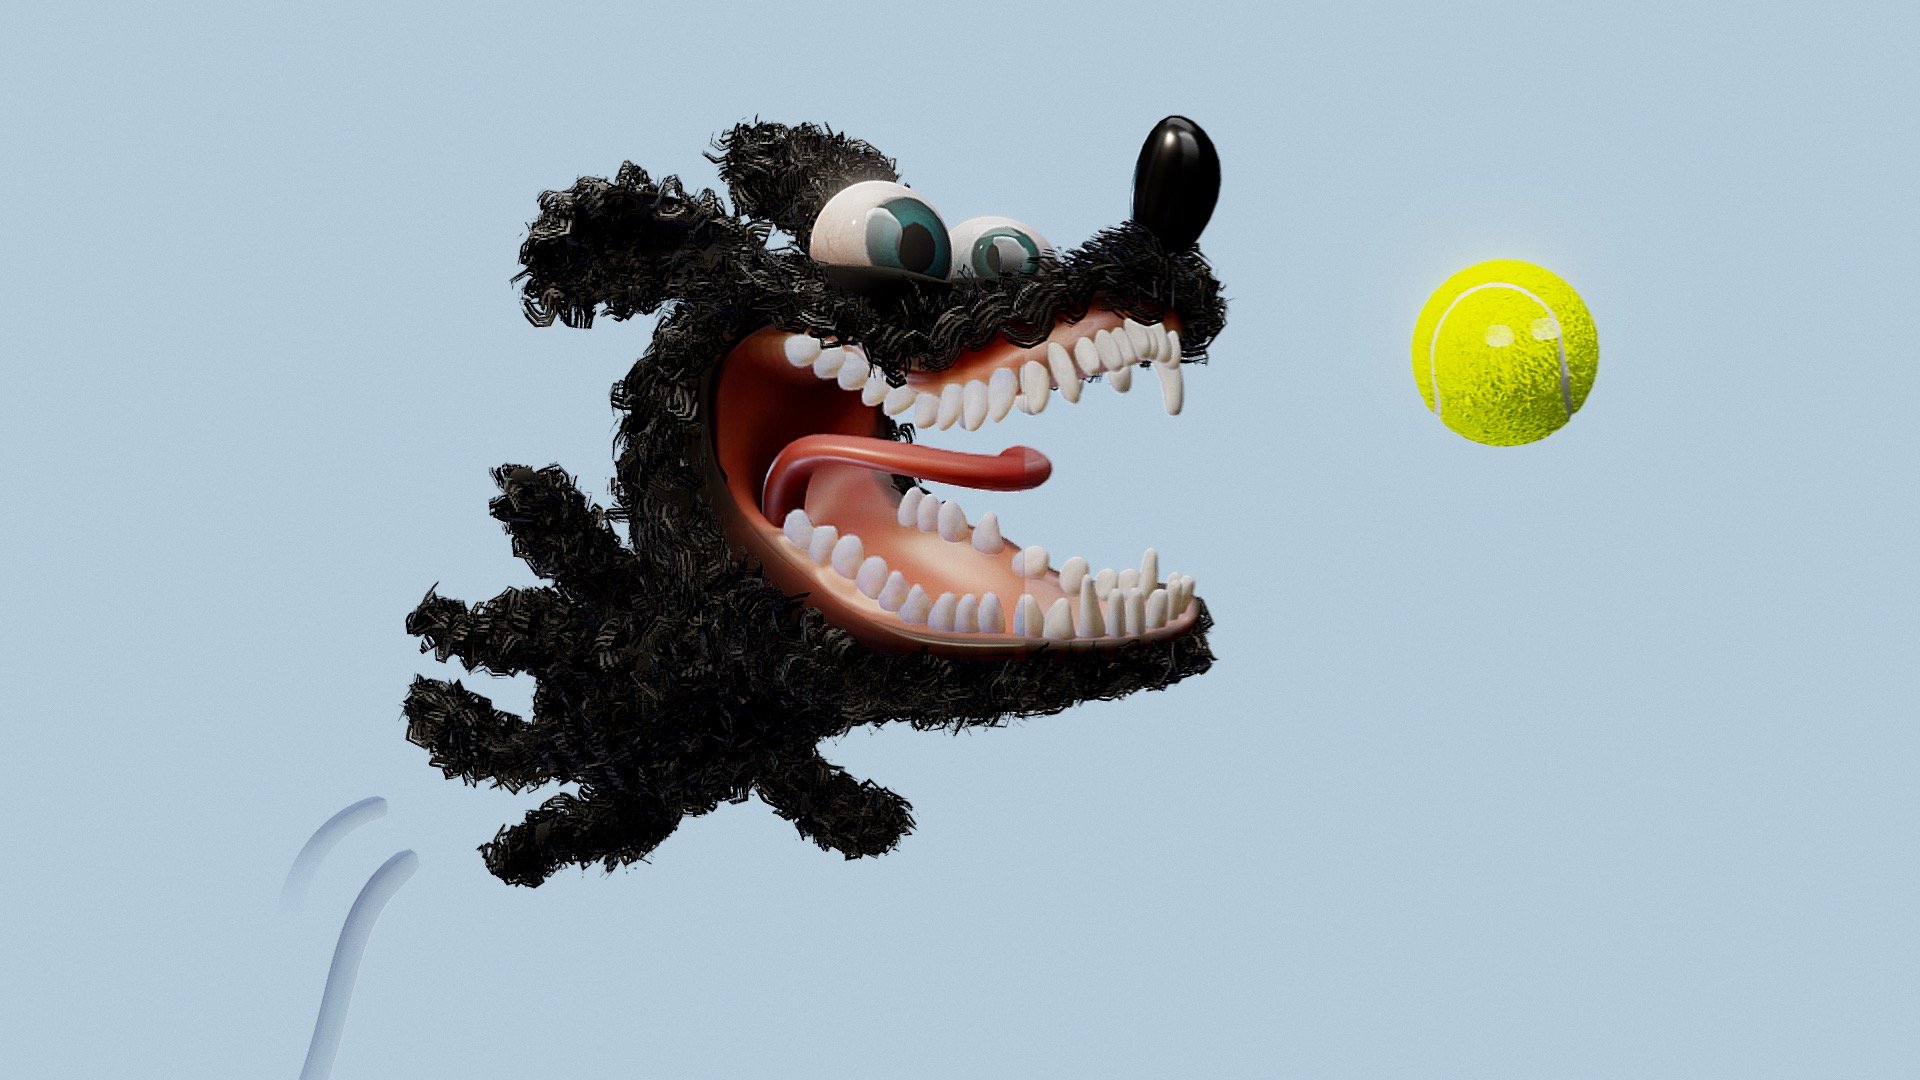 Milford catches the ball.
The Tennisball is made by Cécile Amstad and i bought it from sketchfab 3d model